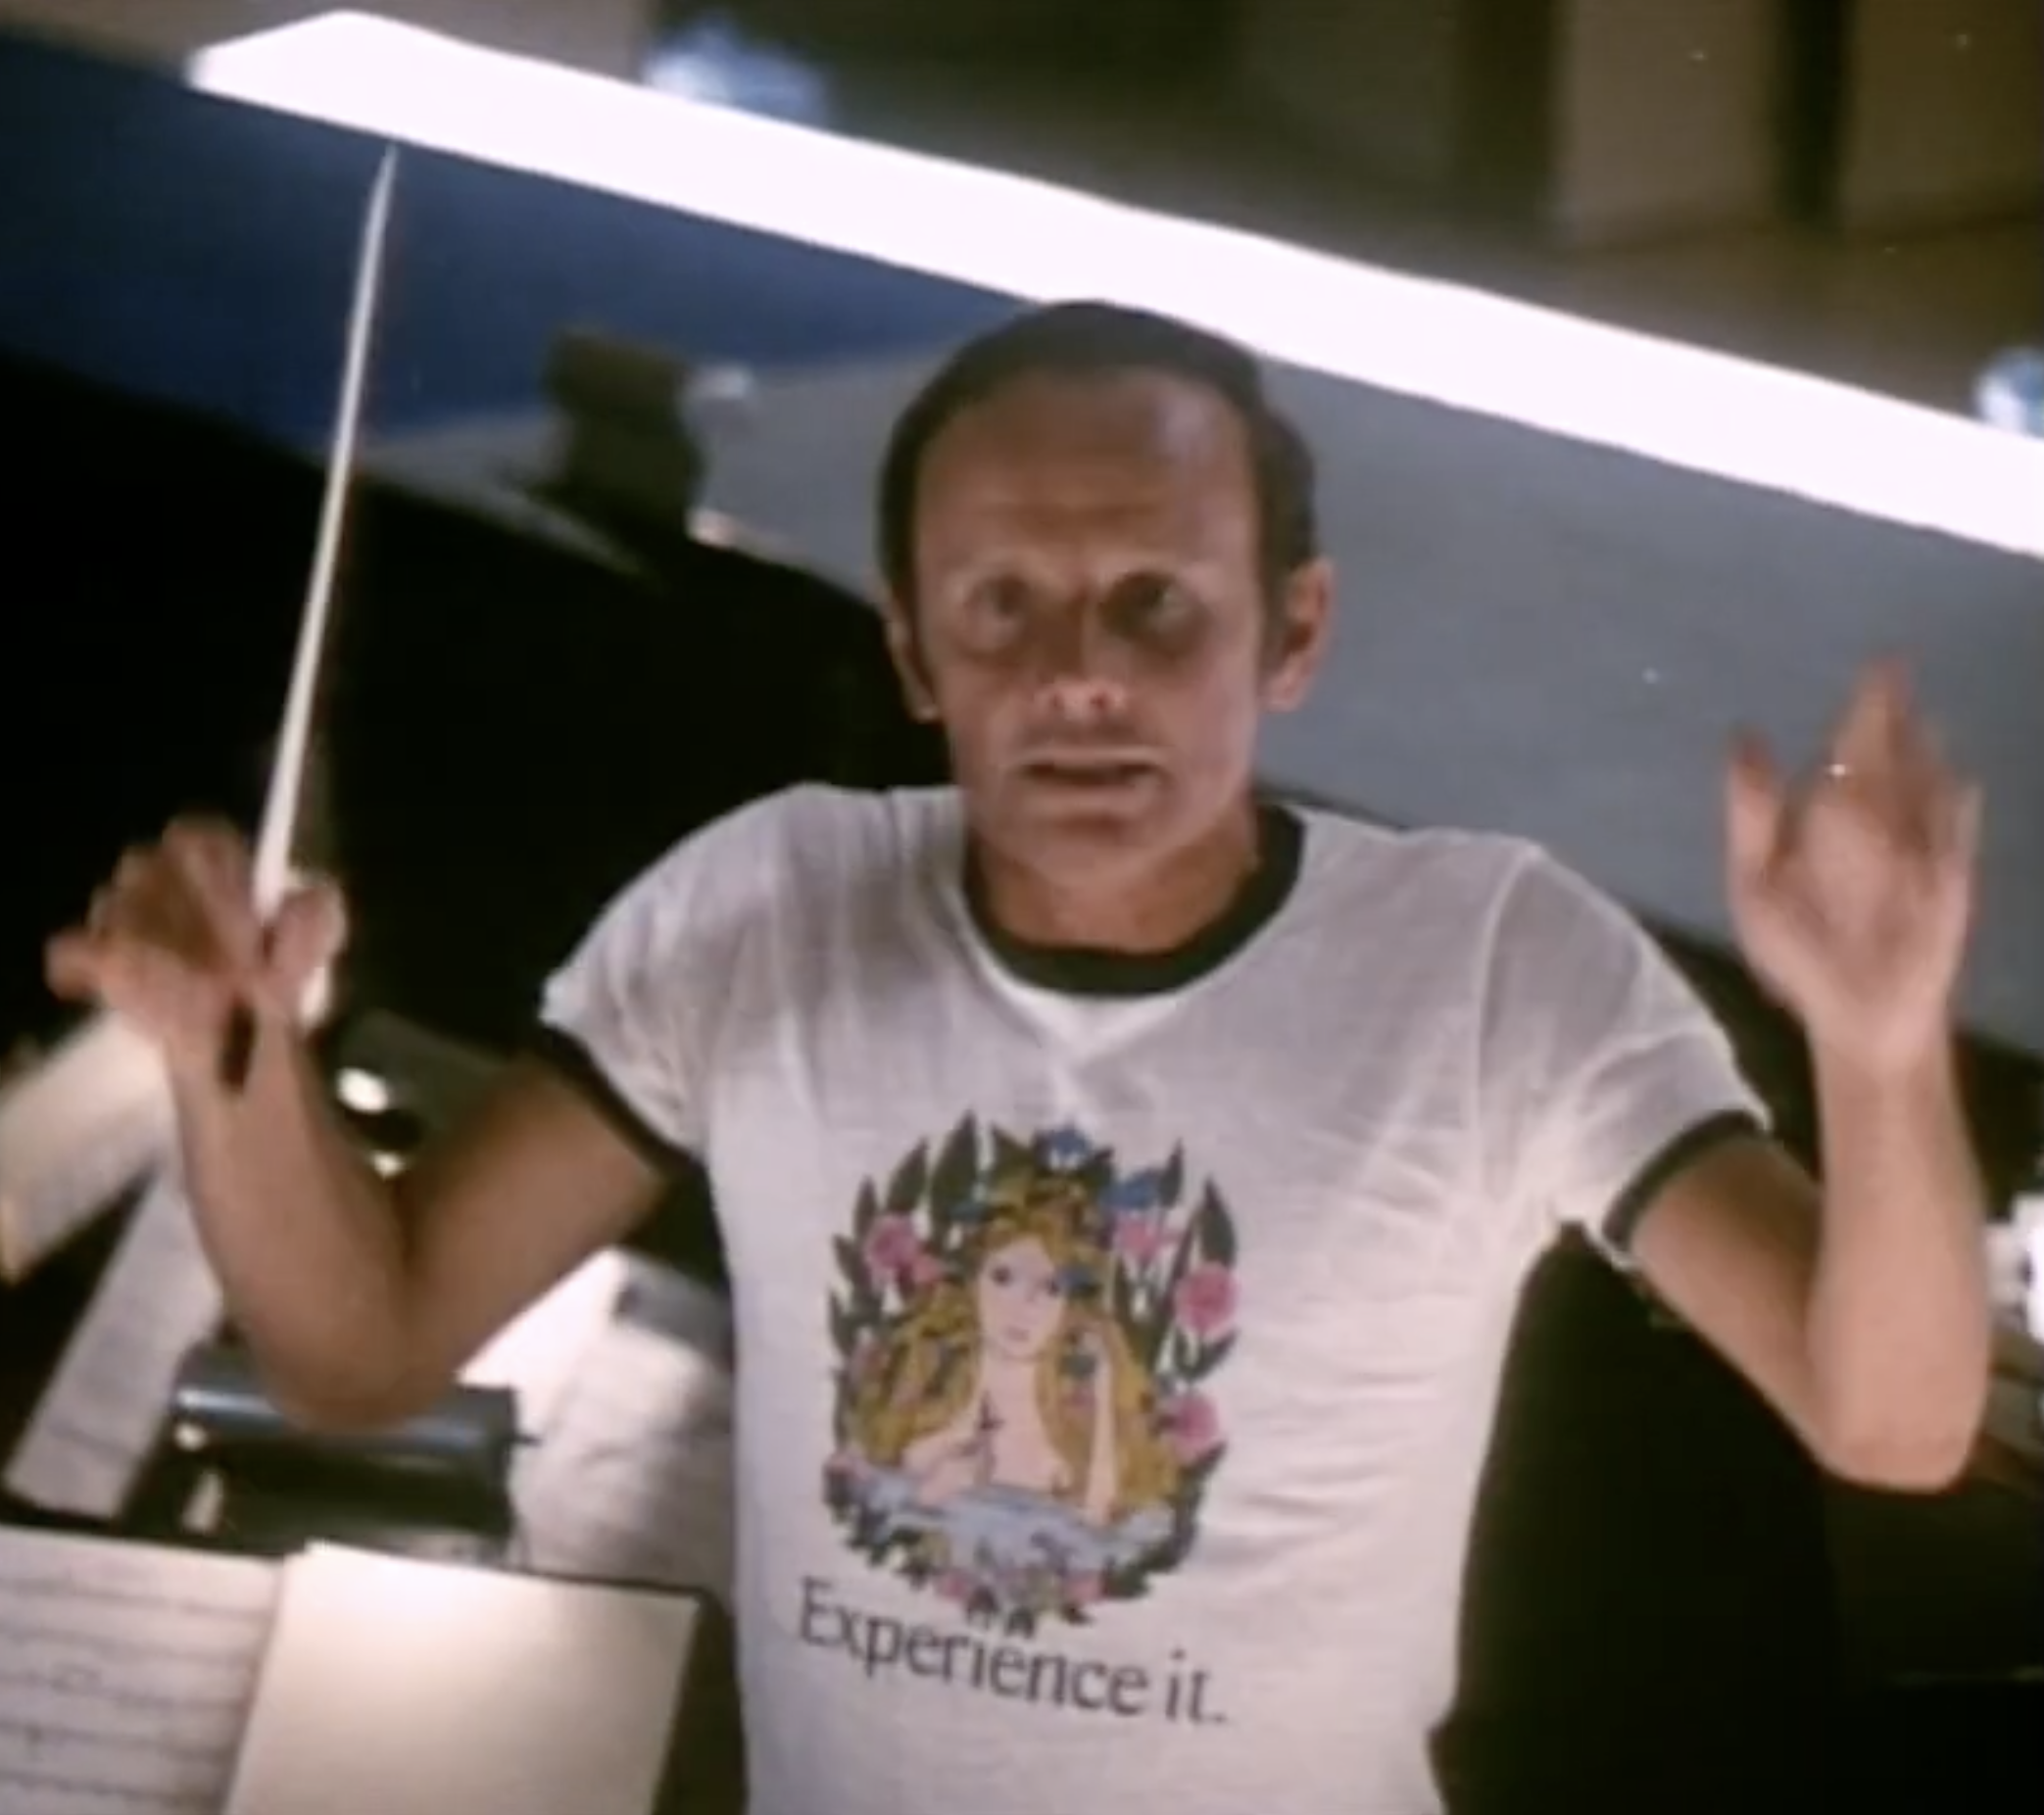 Herbal Essence 'Experience it' shirt worn by the composer in Smile (1975)